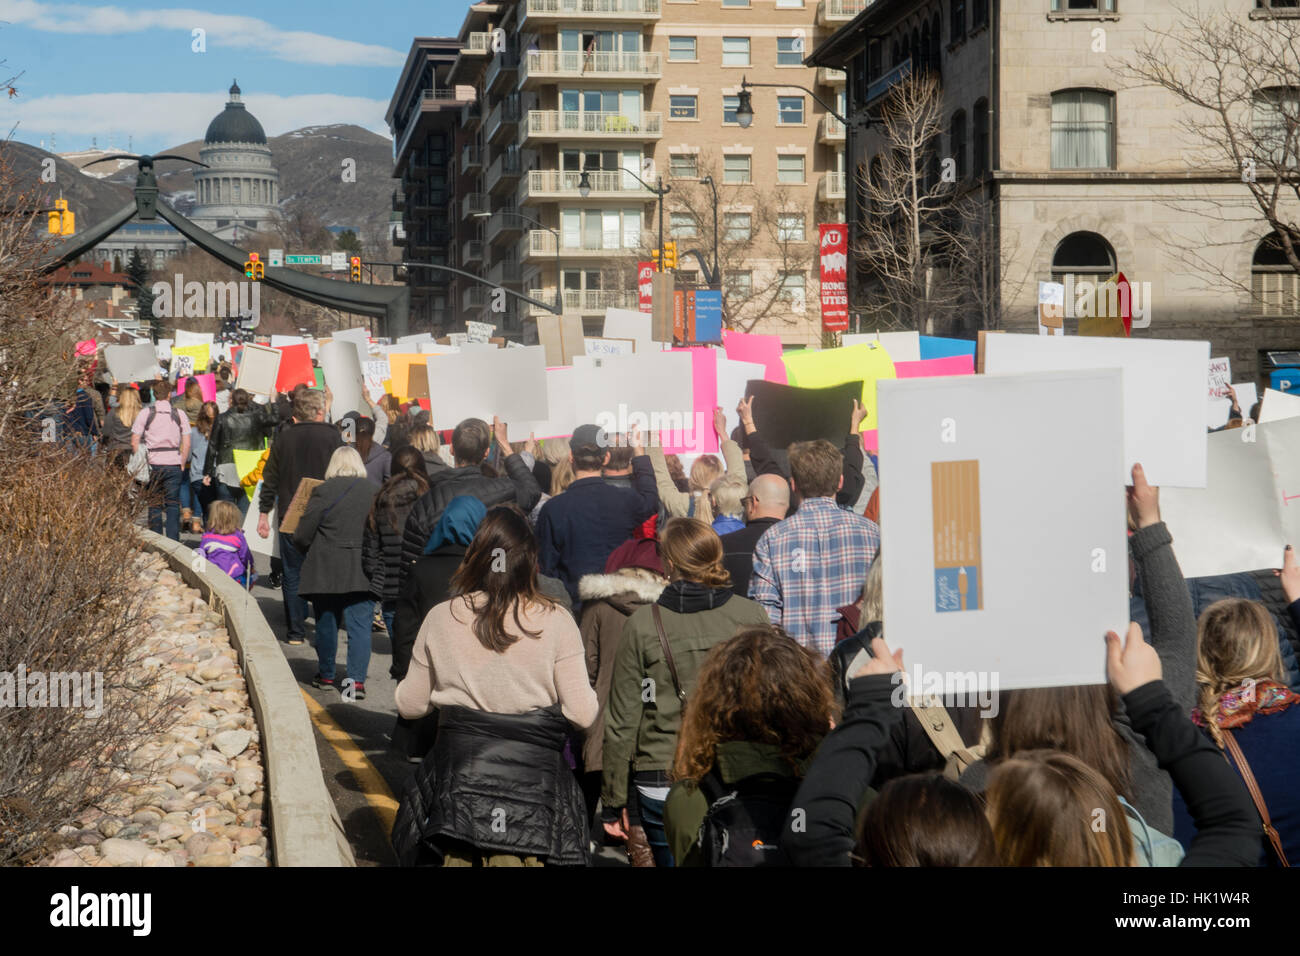 Salt Lake City, USA. 4th Feb, 2017. People in Salt Lake City march to support refugees and oppose President Trump's executive order banning travel from some predominantly Muslim countries. Credit: Brent Olson/Alamy Live News Stock Photo